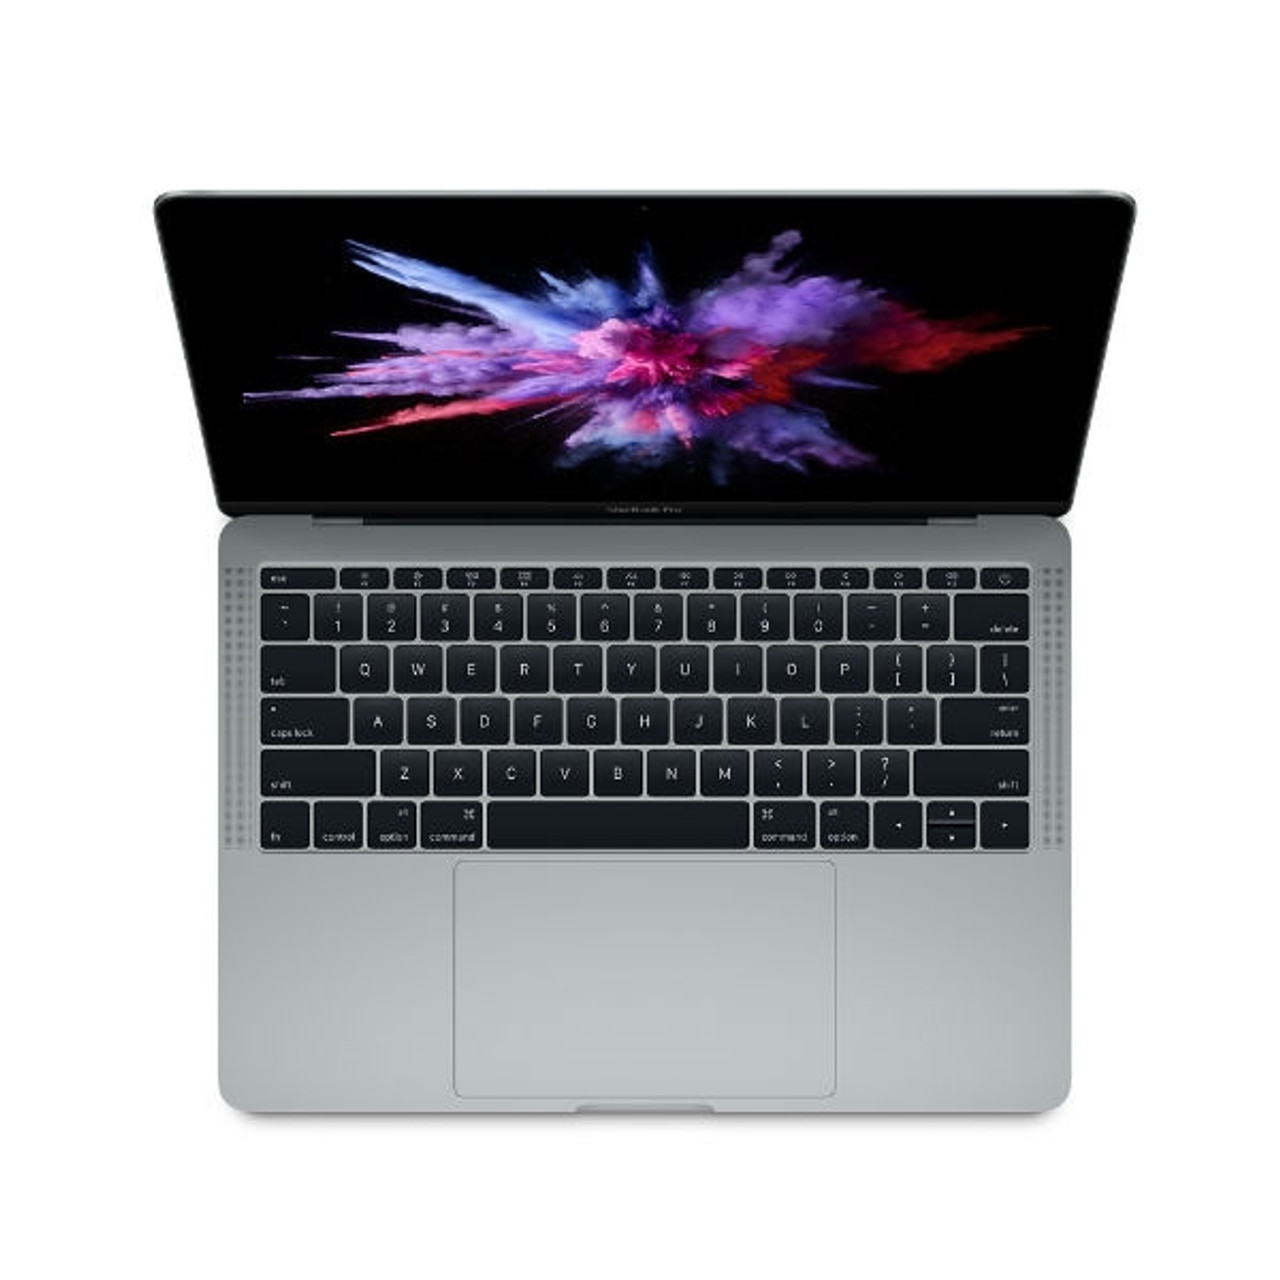 Fair Condition*: Apple MacBook Pro 13-inch 2.3GHz Core i5 (Mid 2017, Space  Gray) MPXQ2LL/A 4